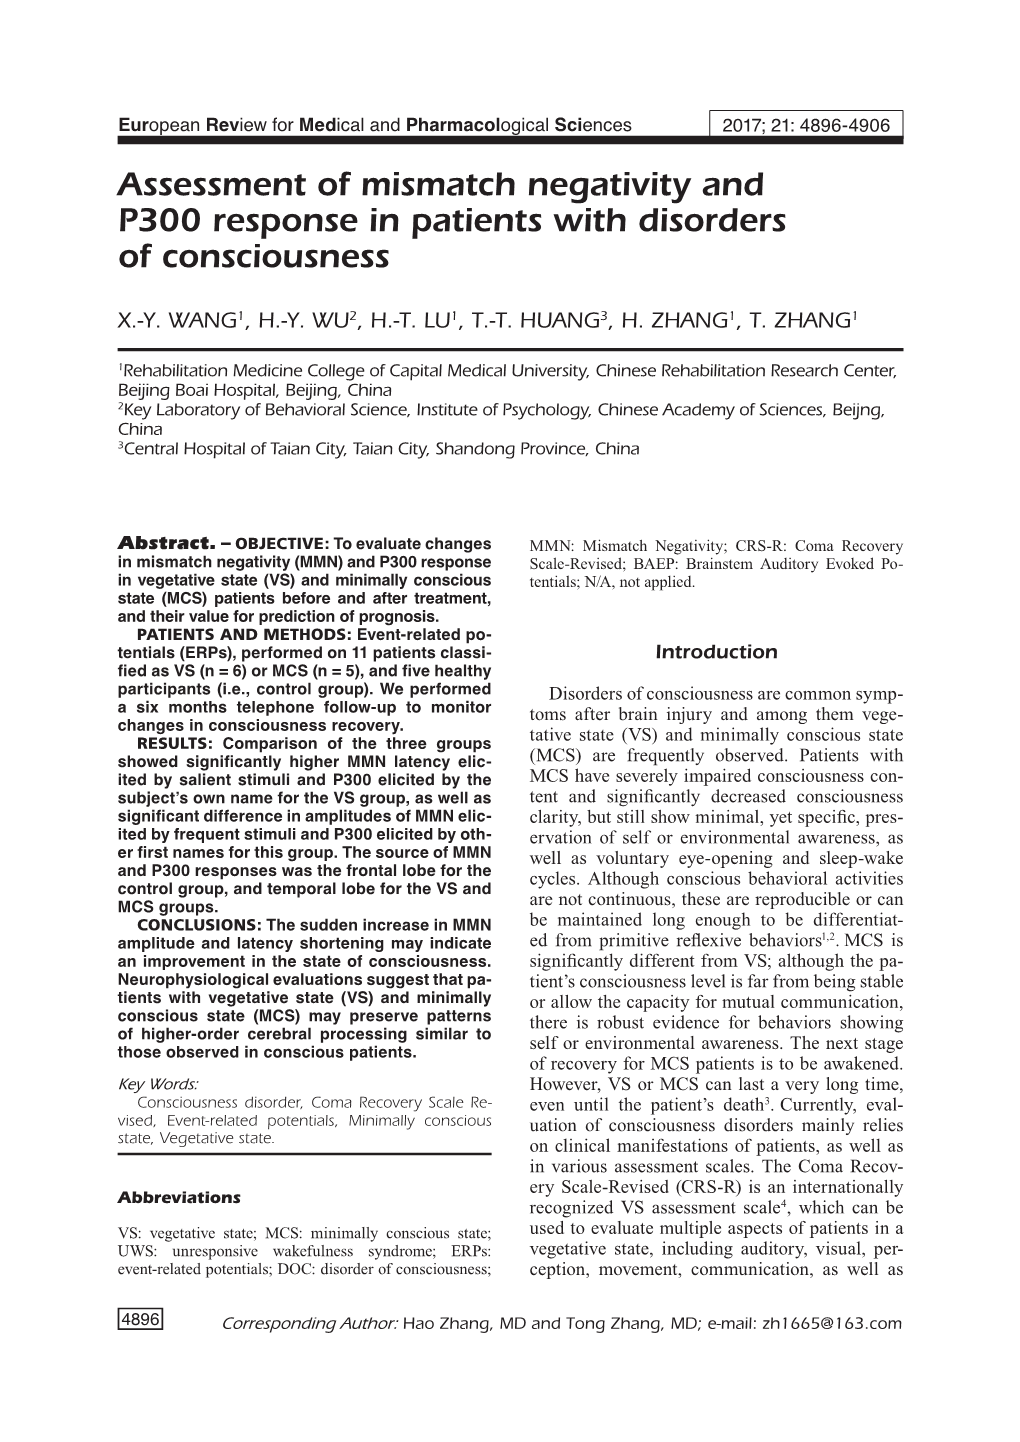 MMN and P300 Response in Disorders of Consciousness to Reflect Symptom Changes in Patients in a More Found That Increased MMN Amplitude Indicated Sensitive Manner